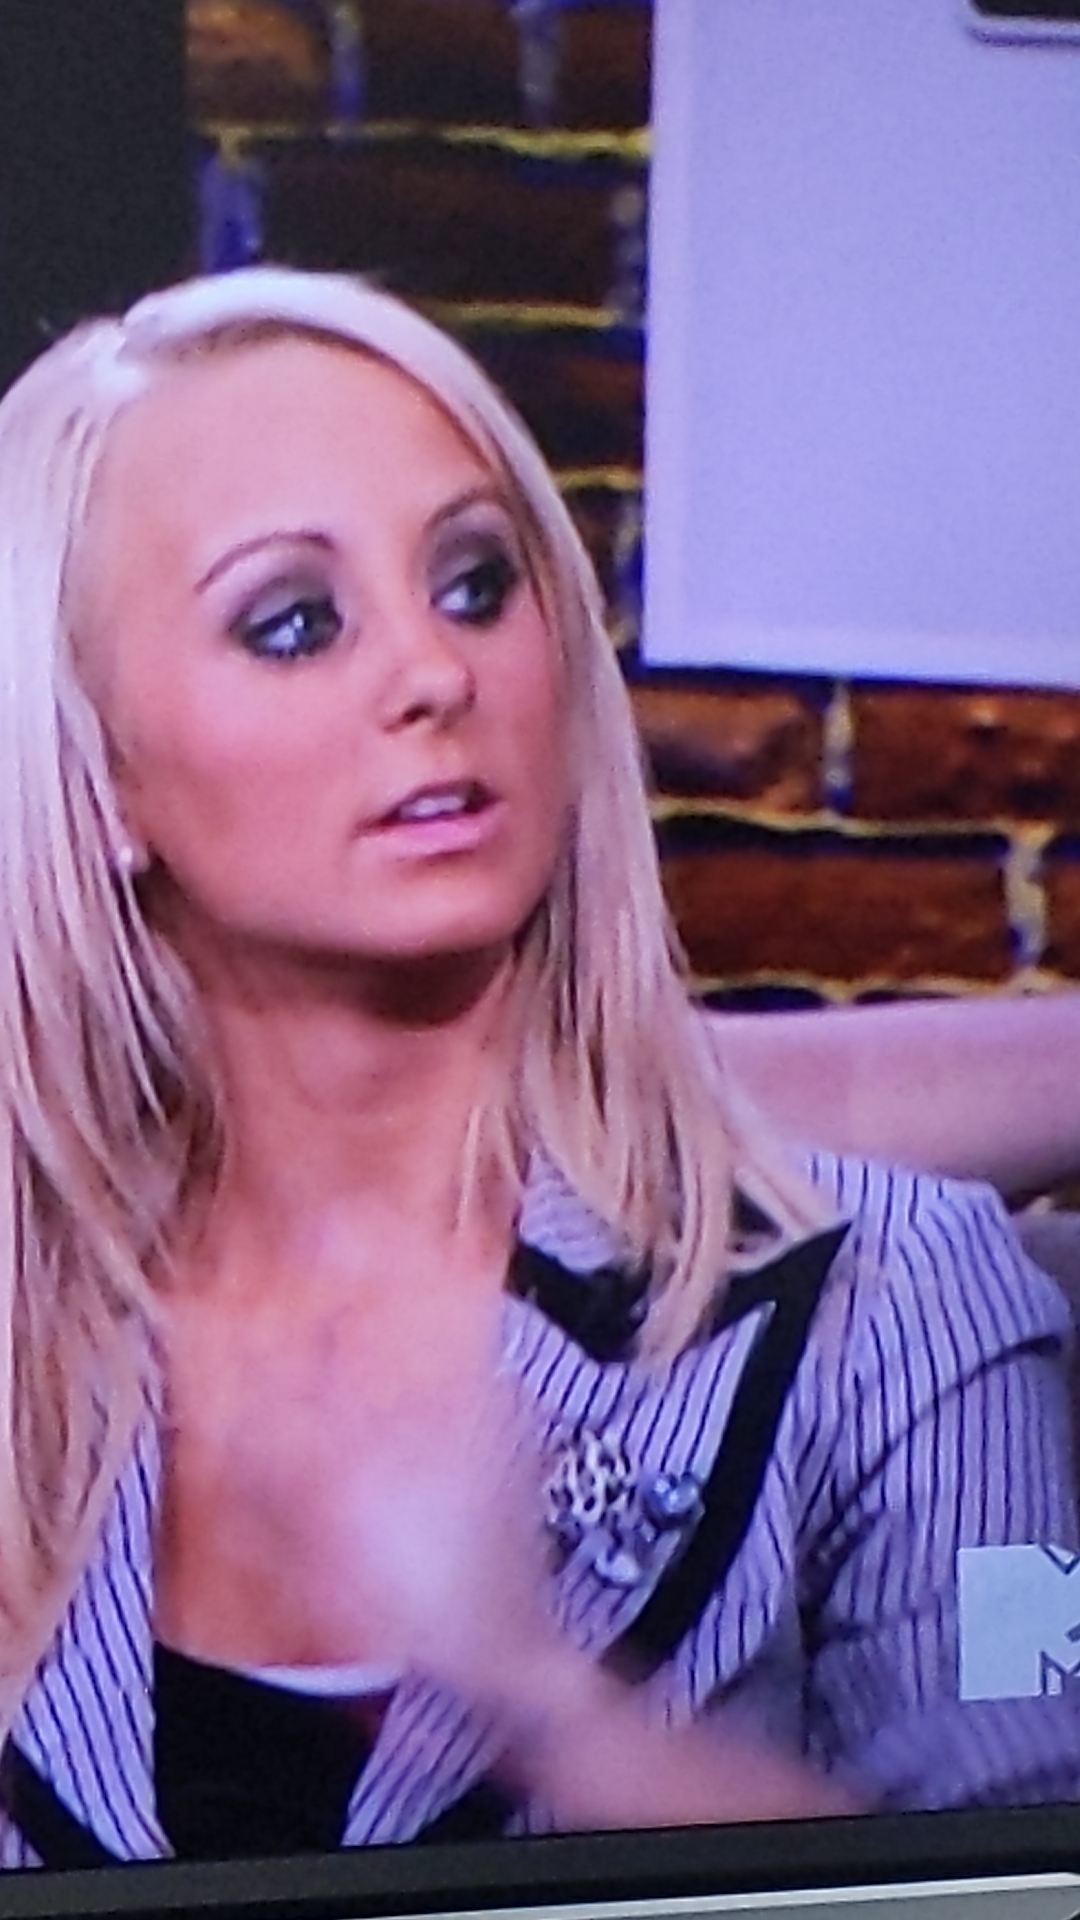 Teen Mom fans think Leah Messer looks totally different in throwback photo & claim the star has ‘dramatically changed’